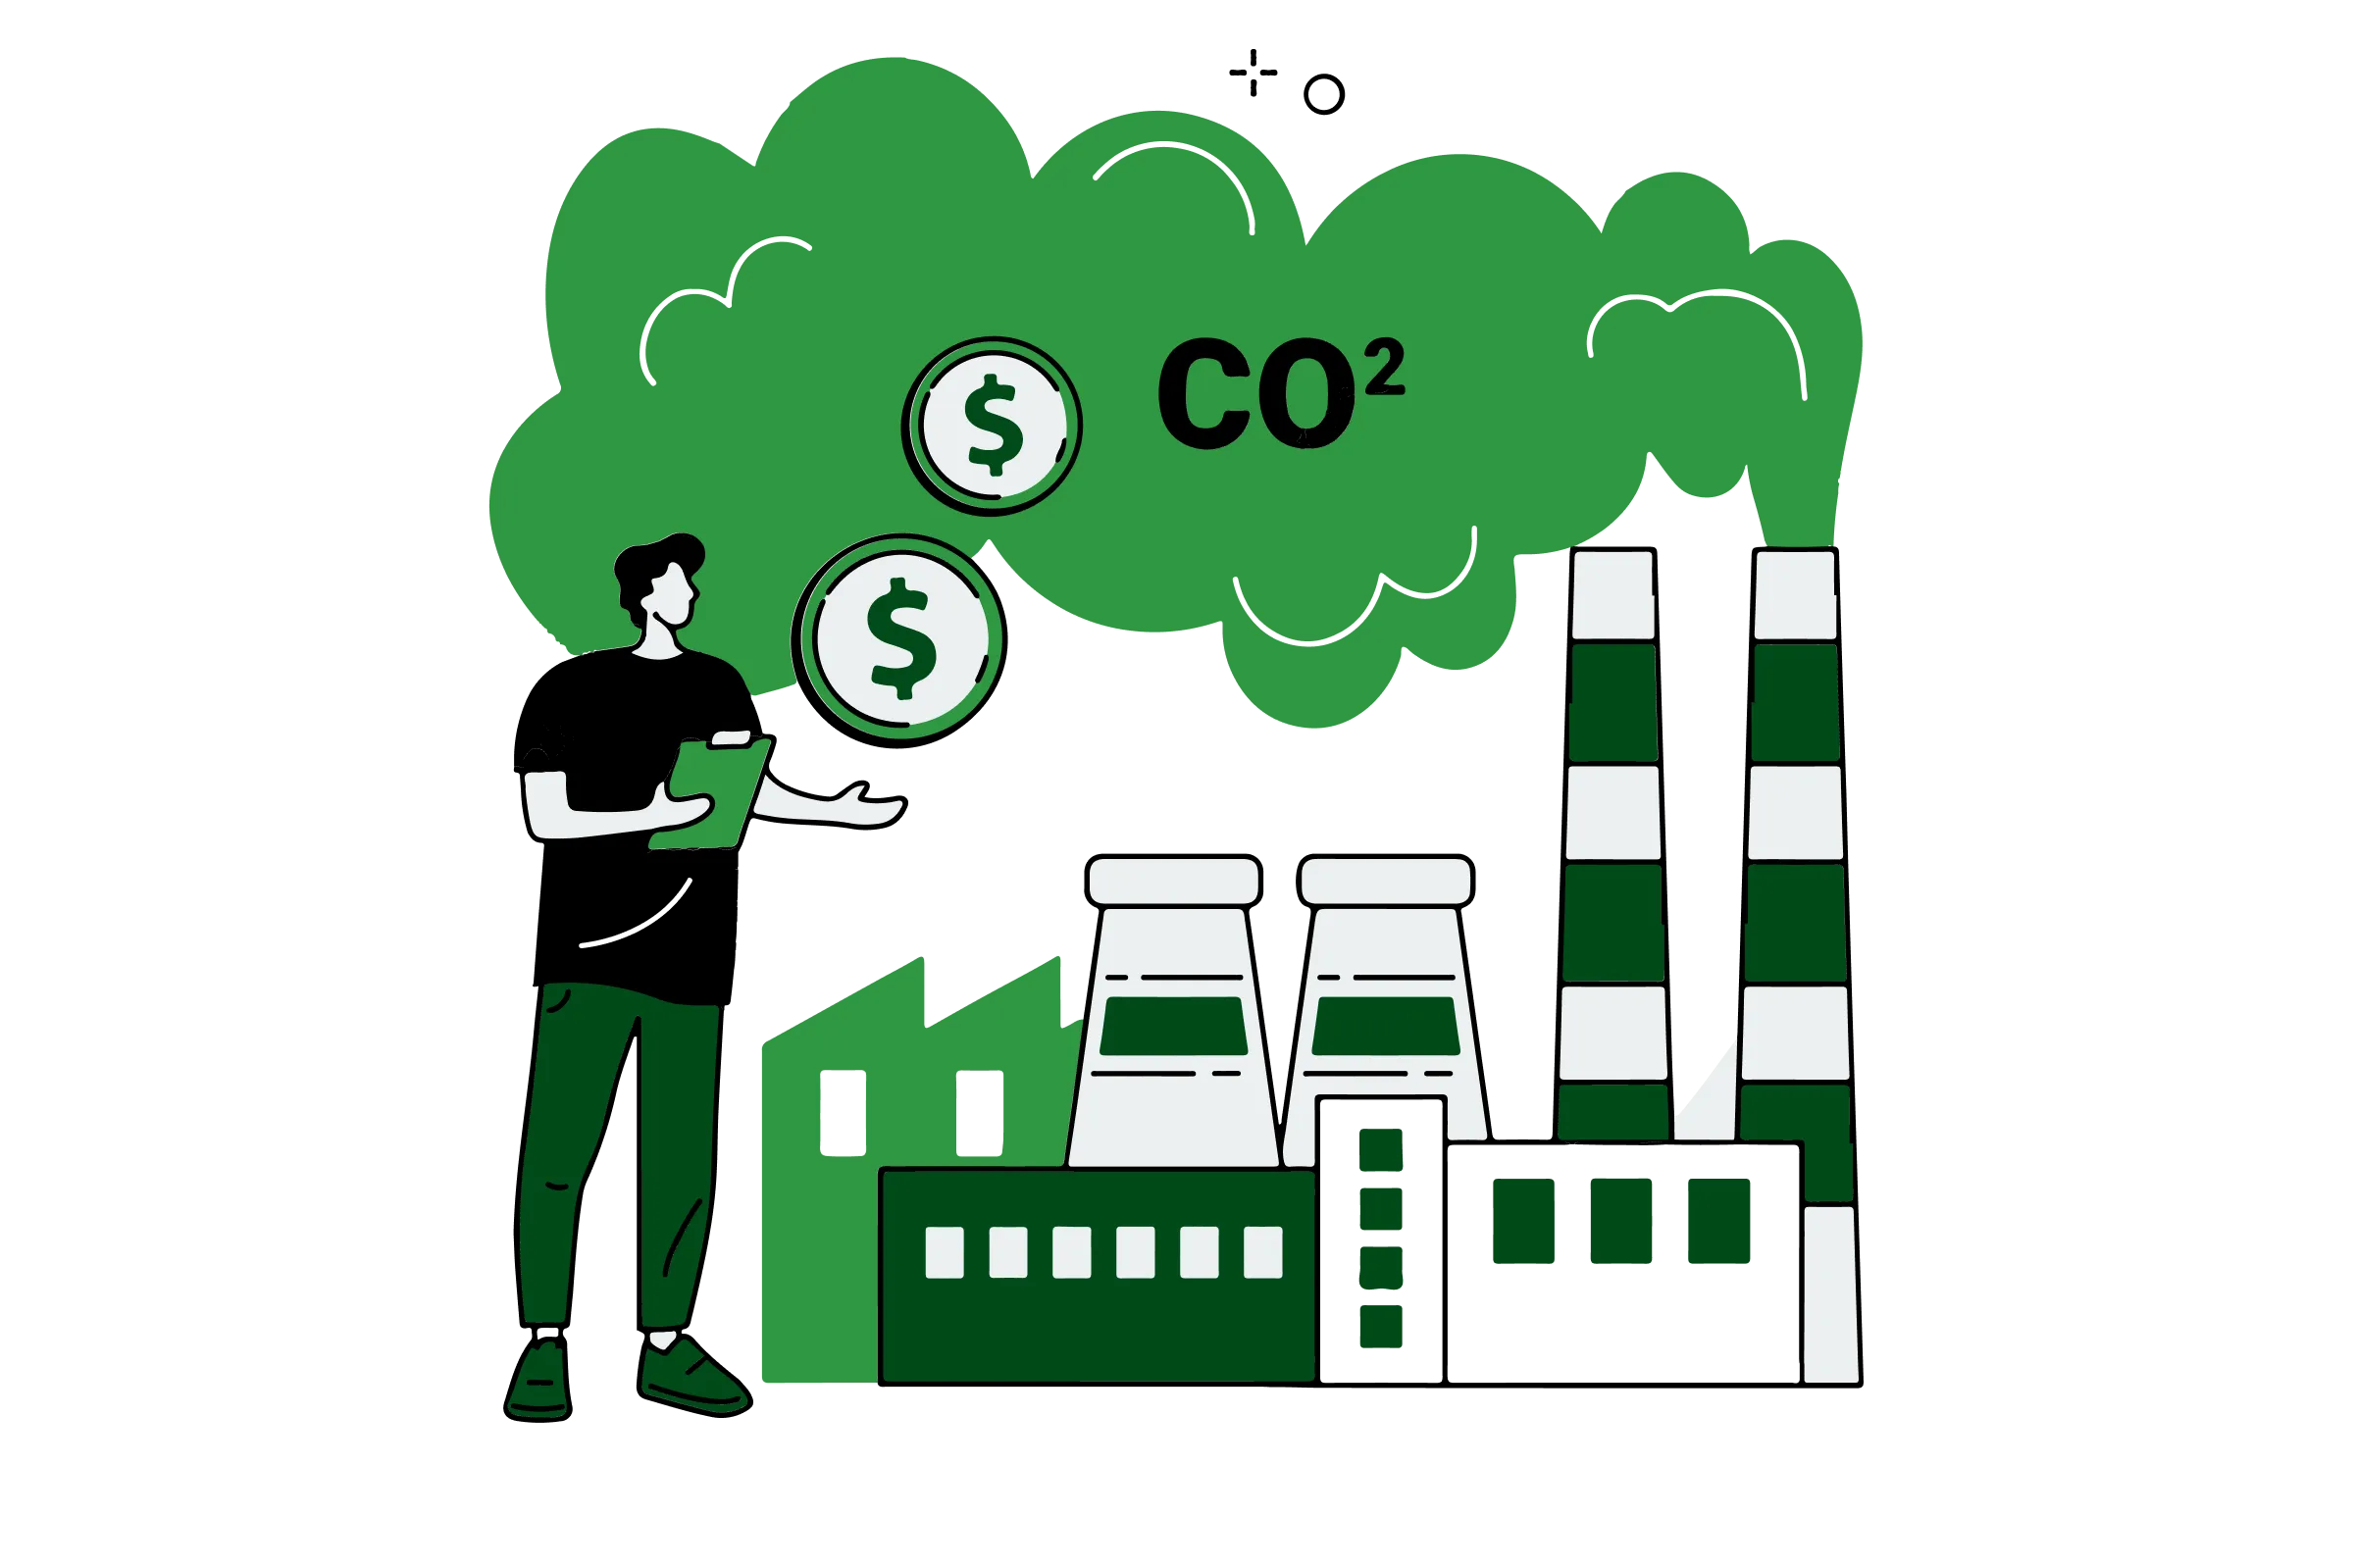 An illustration depicting a man standing outdoors with factories emitting CO2 in the background. The man is holding a calculator and appears to be calculating per capita emissions. The image highlights the significance of understanding emissions per capita in relation to industrial emissions.